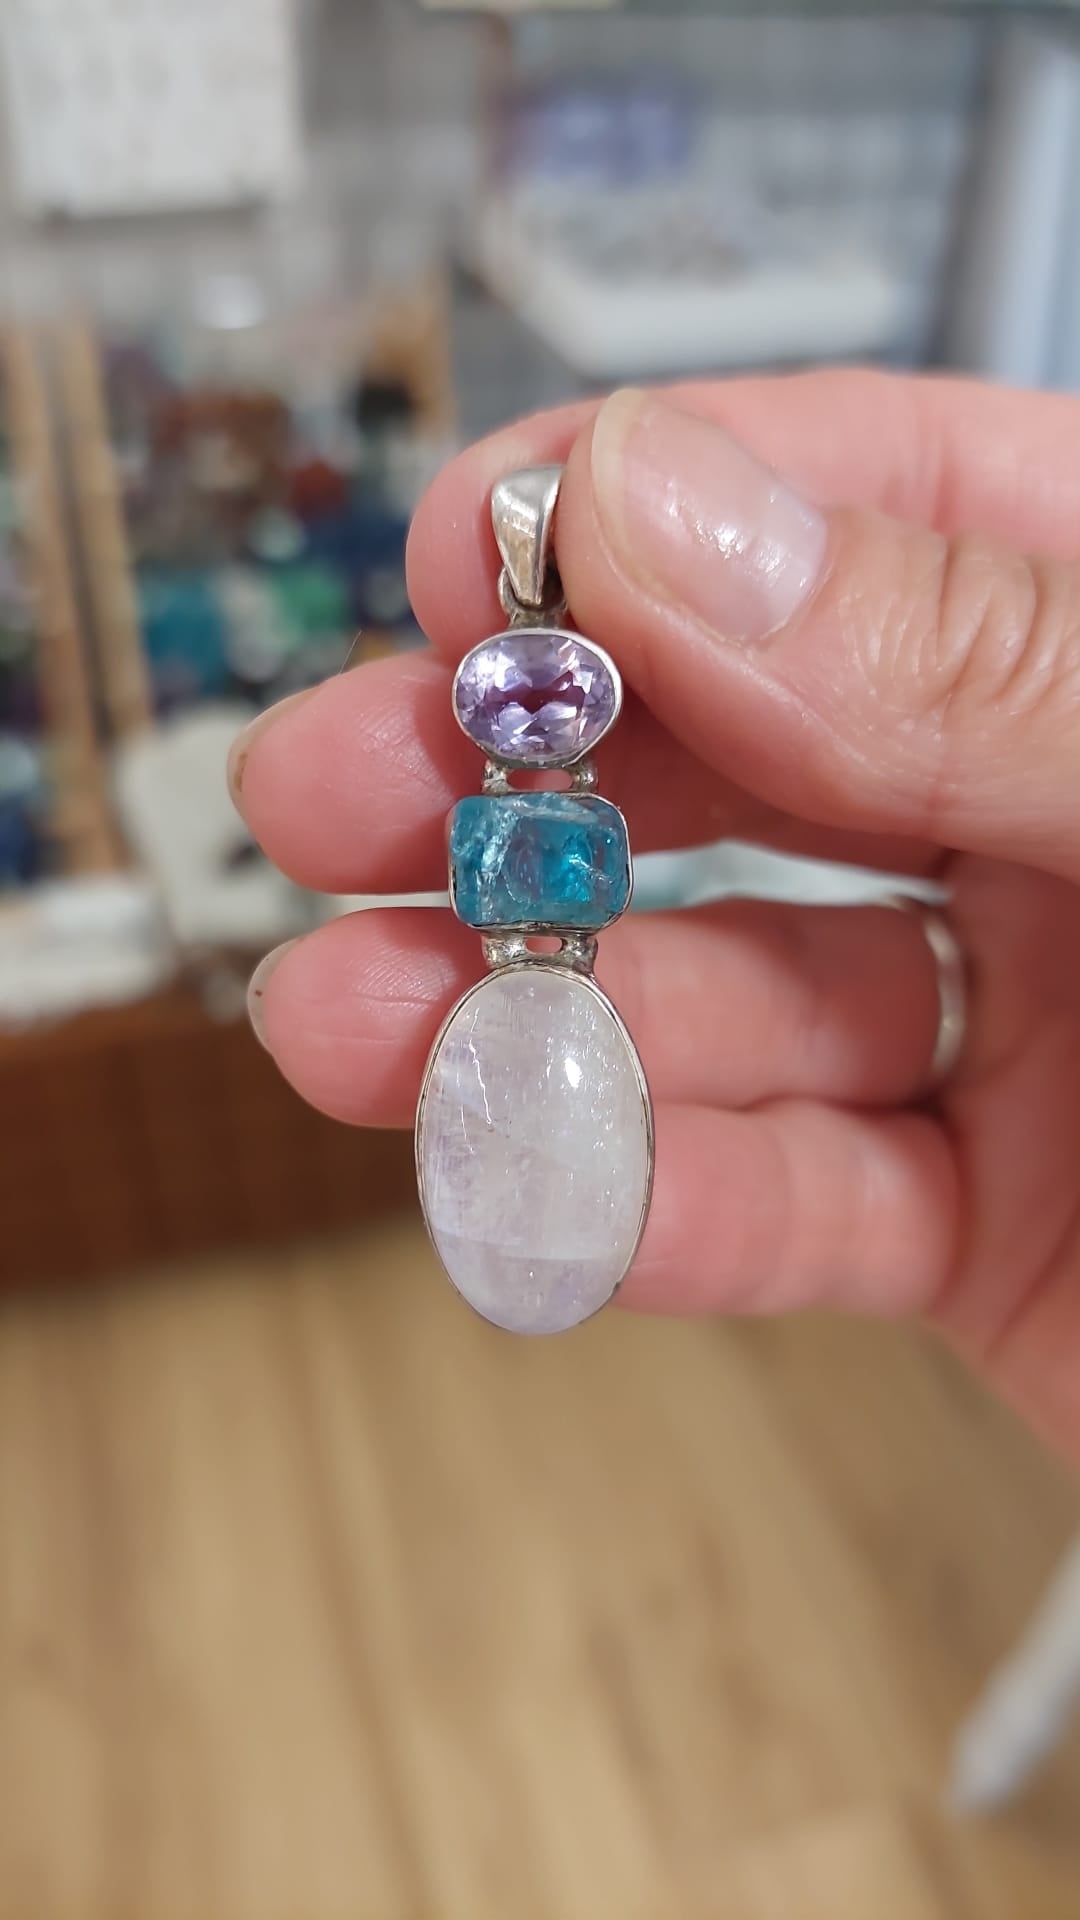 Moonstone, Blue Topaz and Amethyst Pendant - 925 Sterling Silver